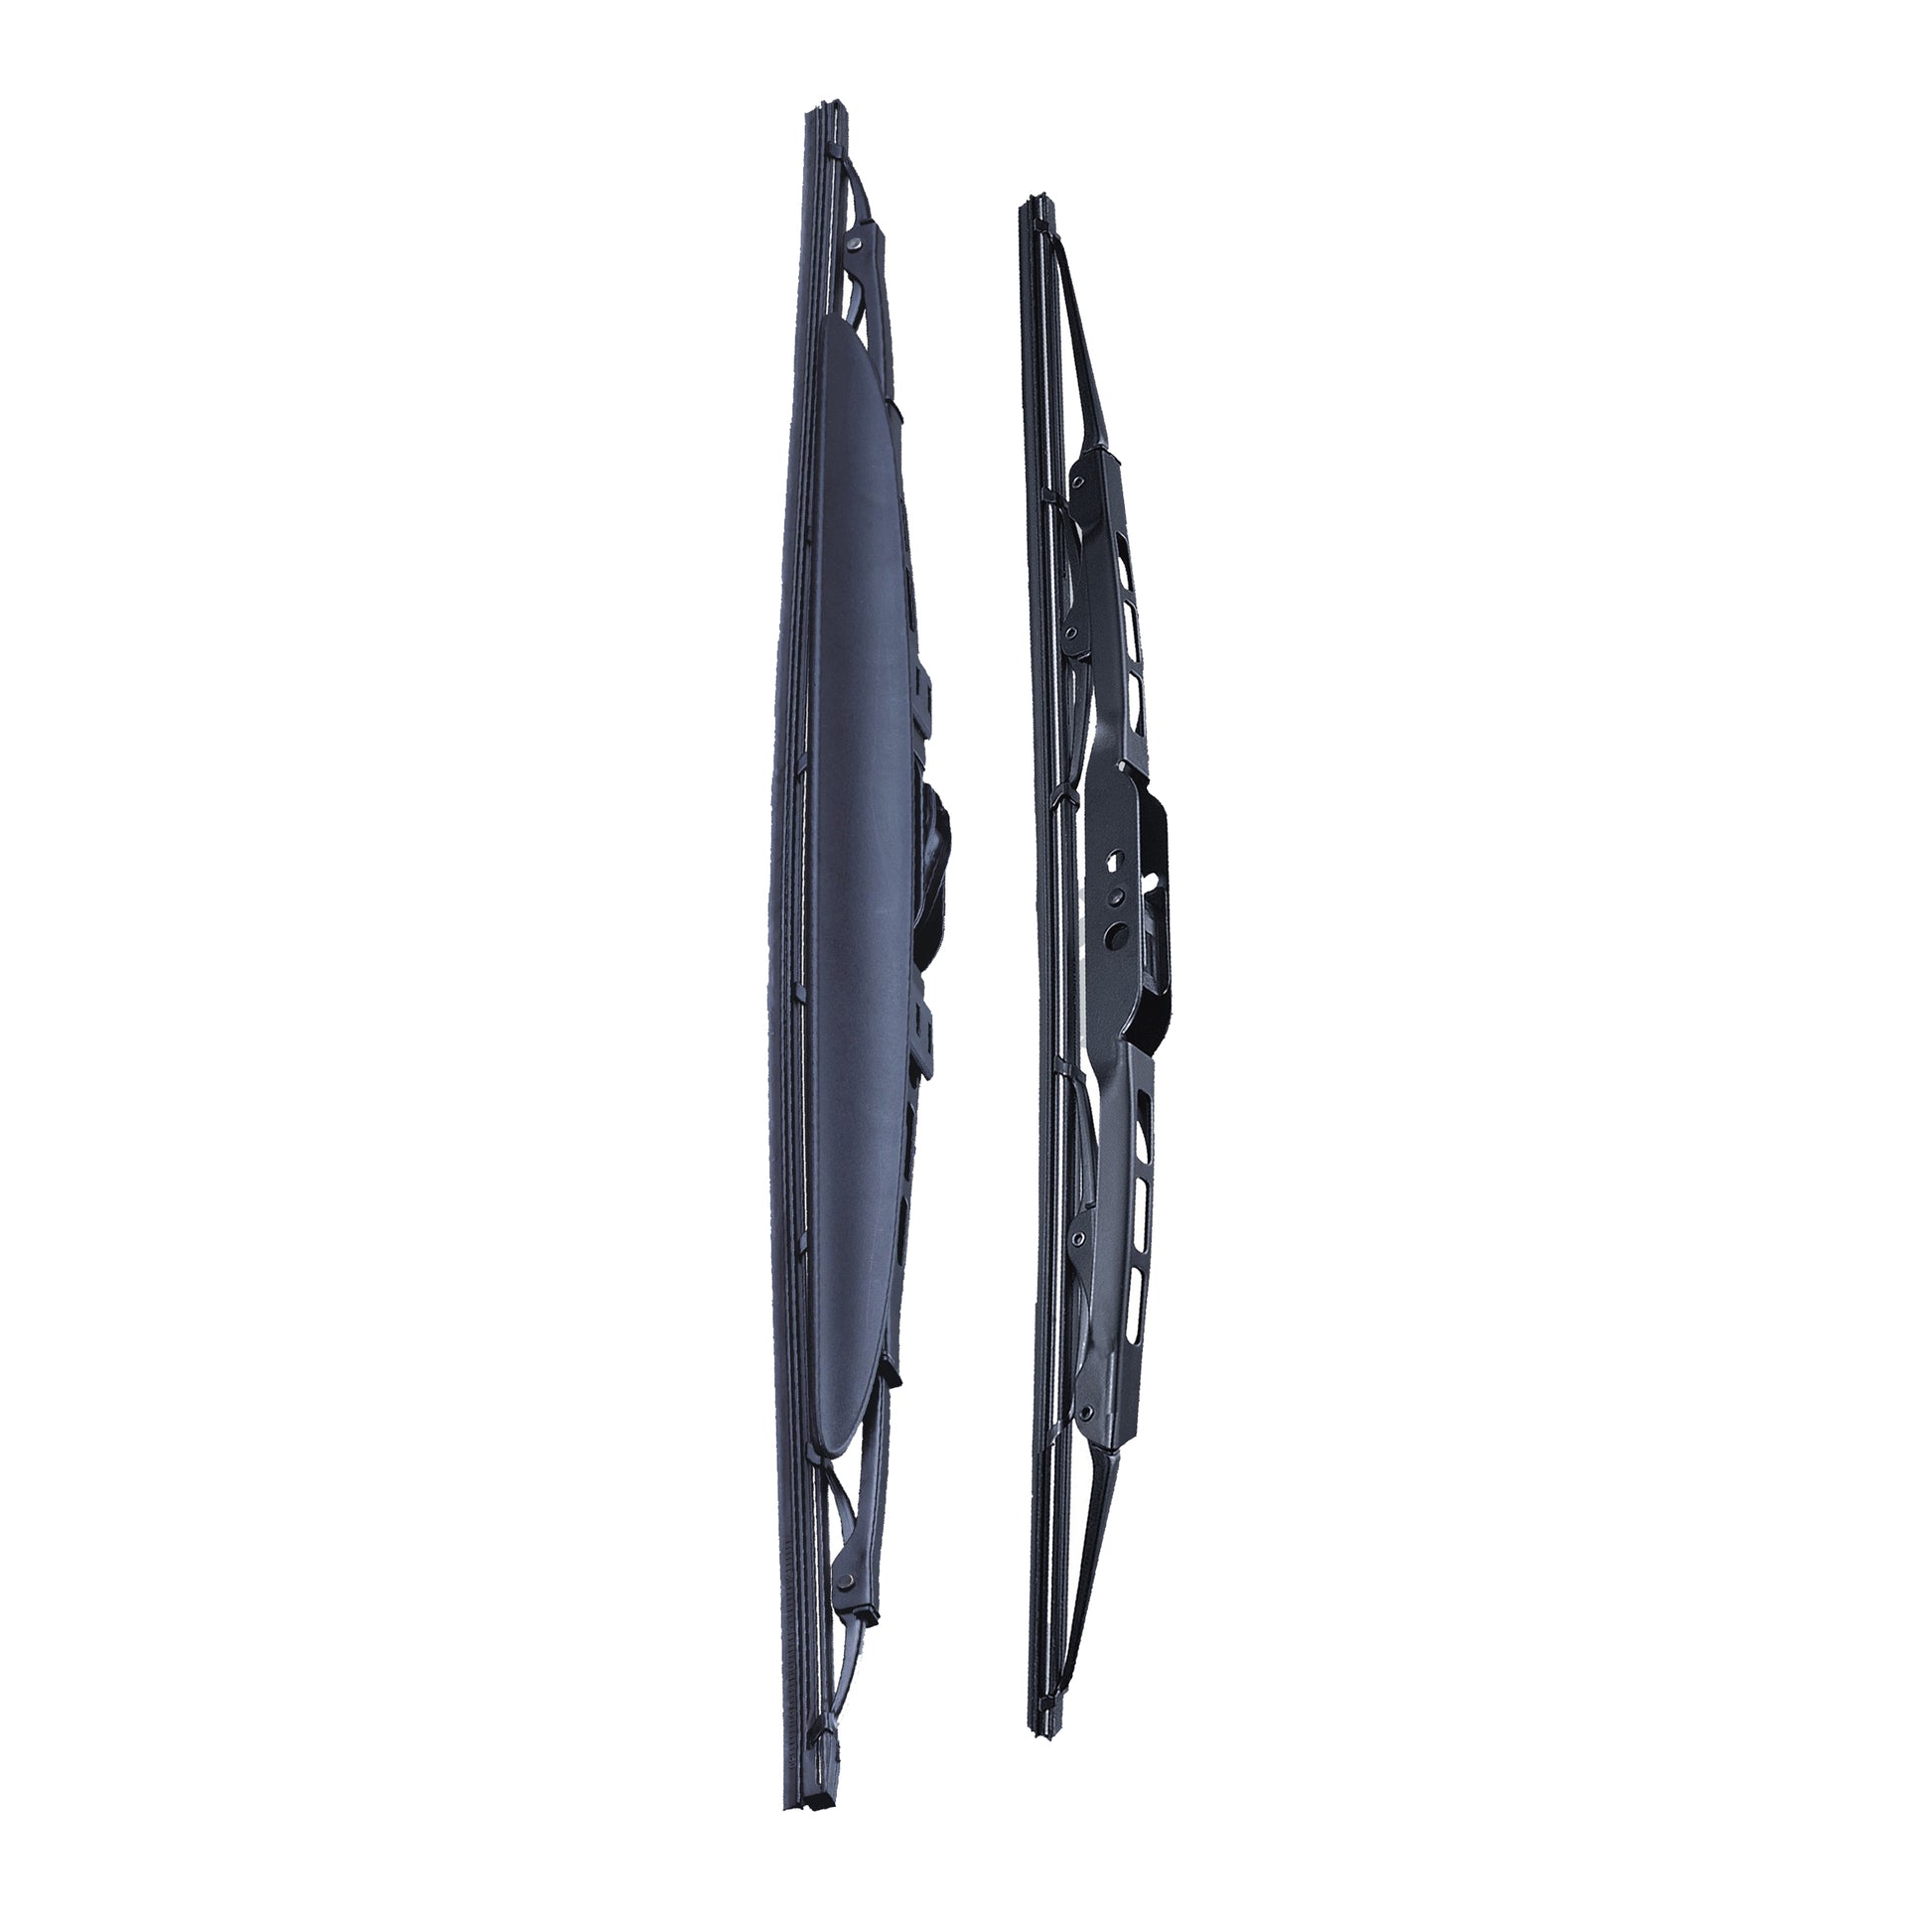 LEXUS RX 300 SUV Oct 2000 to May 2003 Wiper Blade Kit